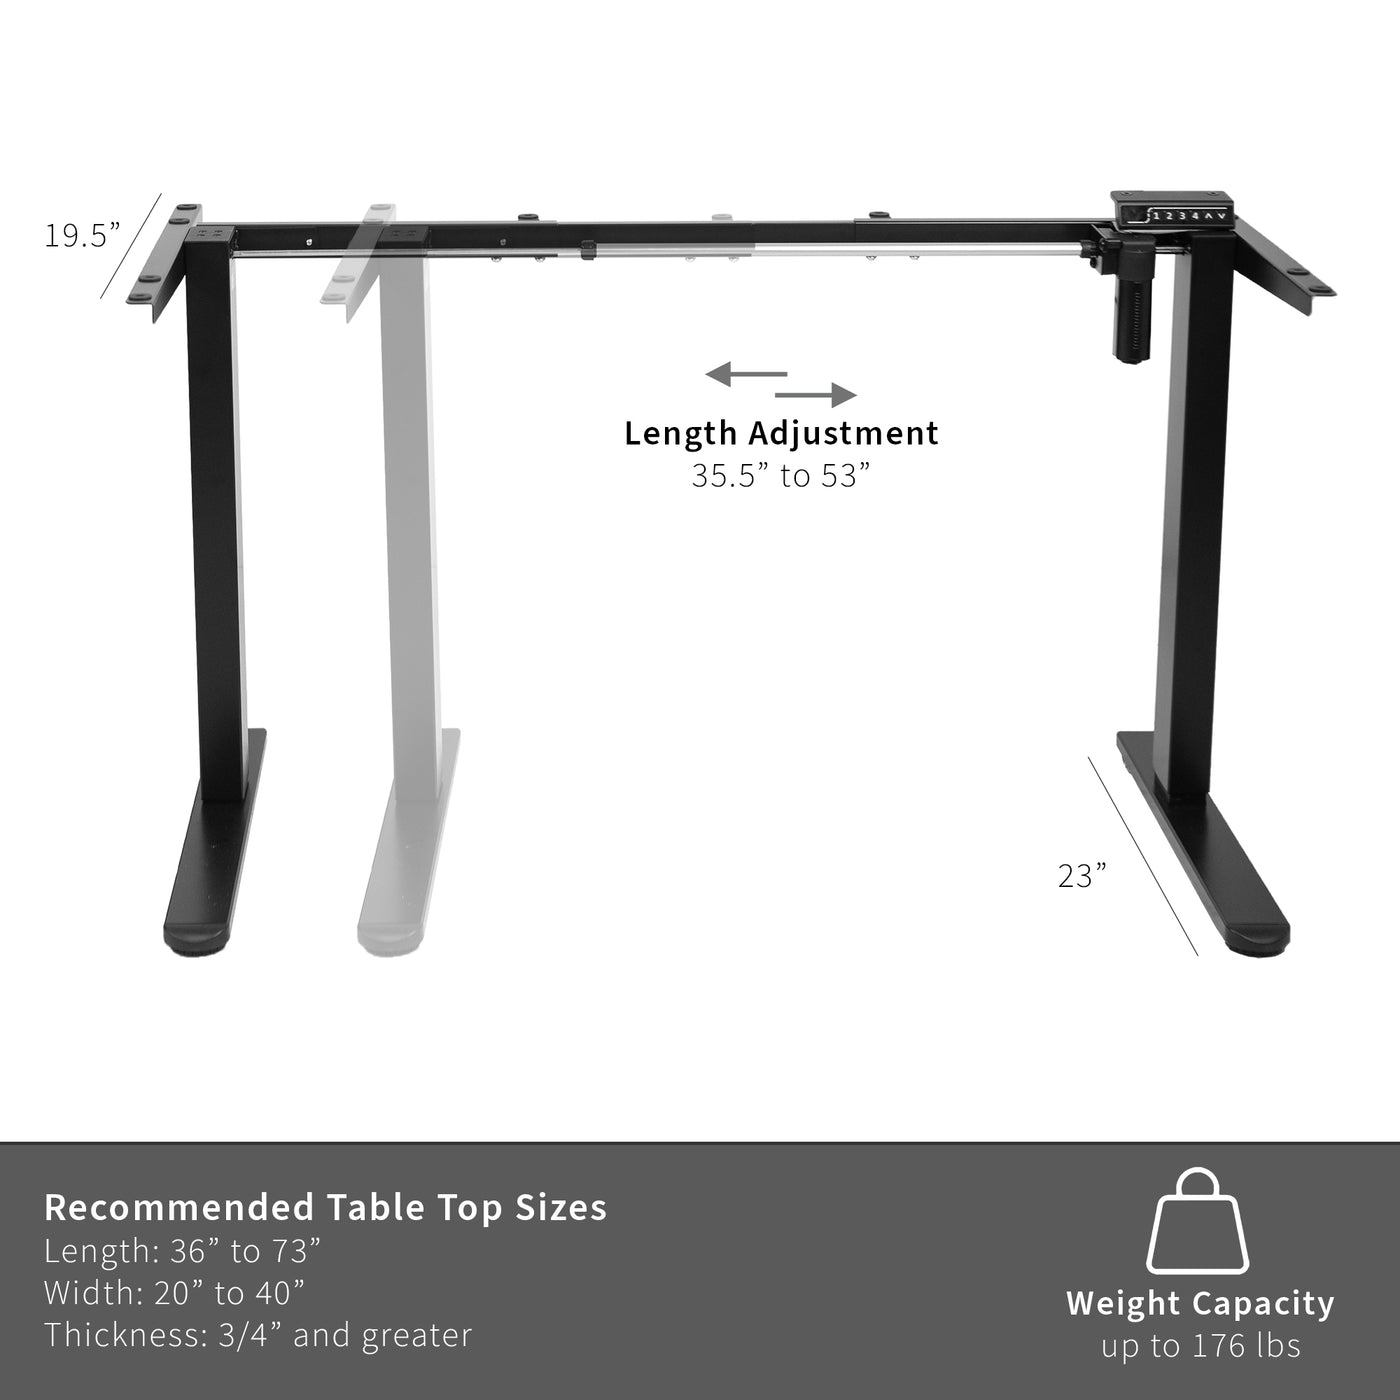 Length adjustment provides compatibility with various desktop sizes.